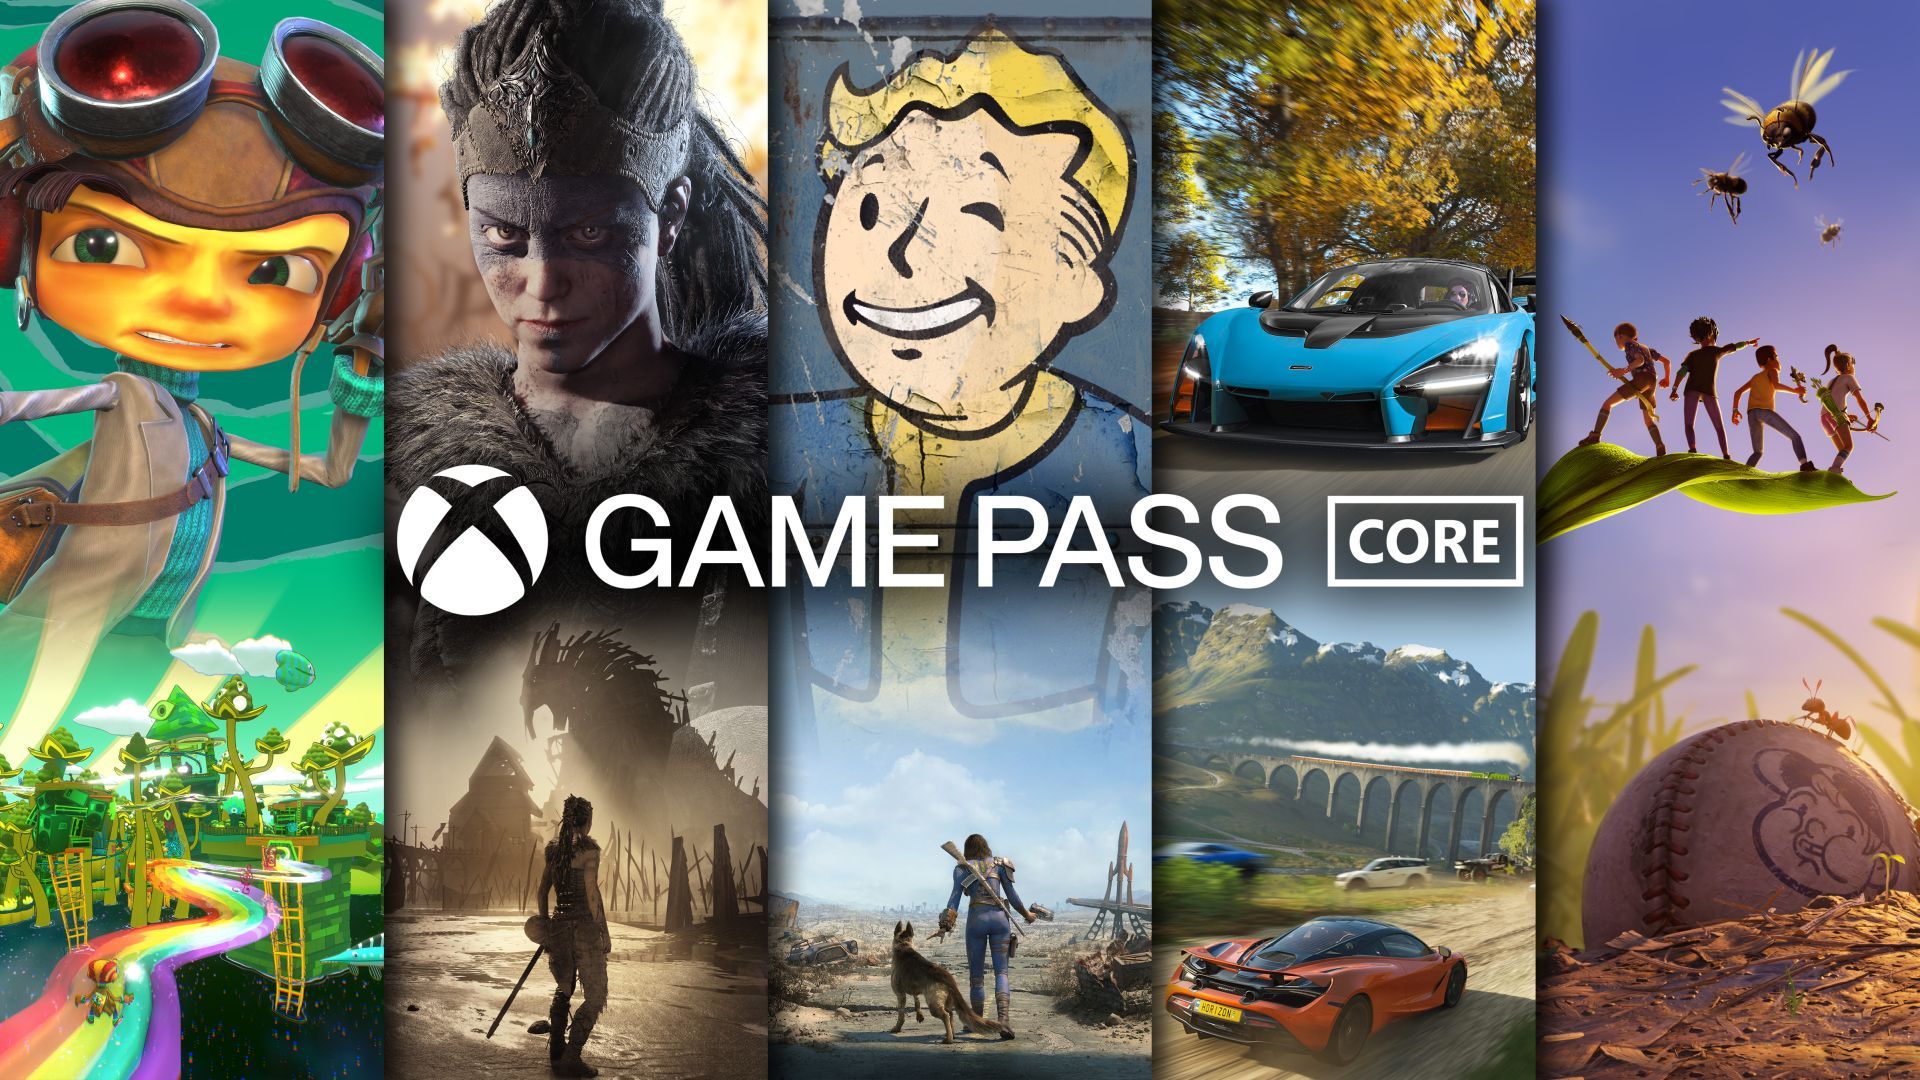 XBOX Game Pass Core 6 Months Subscription Card CA